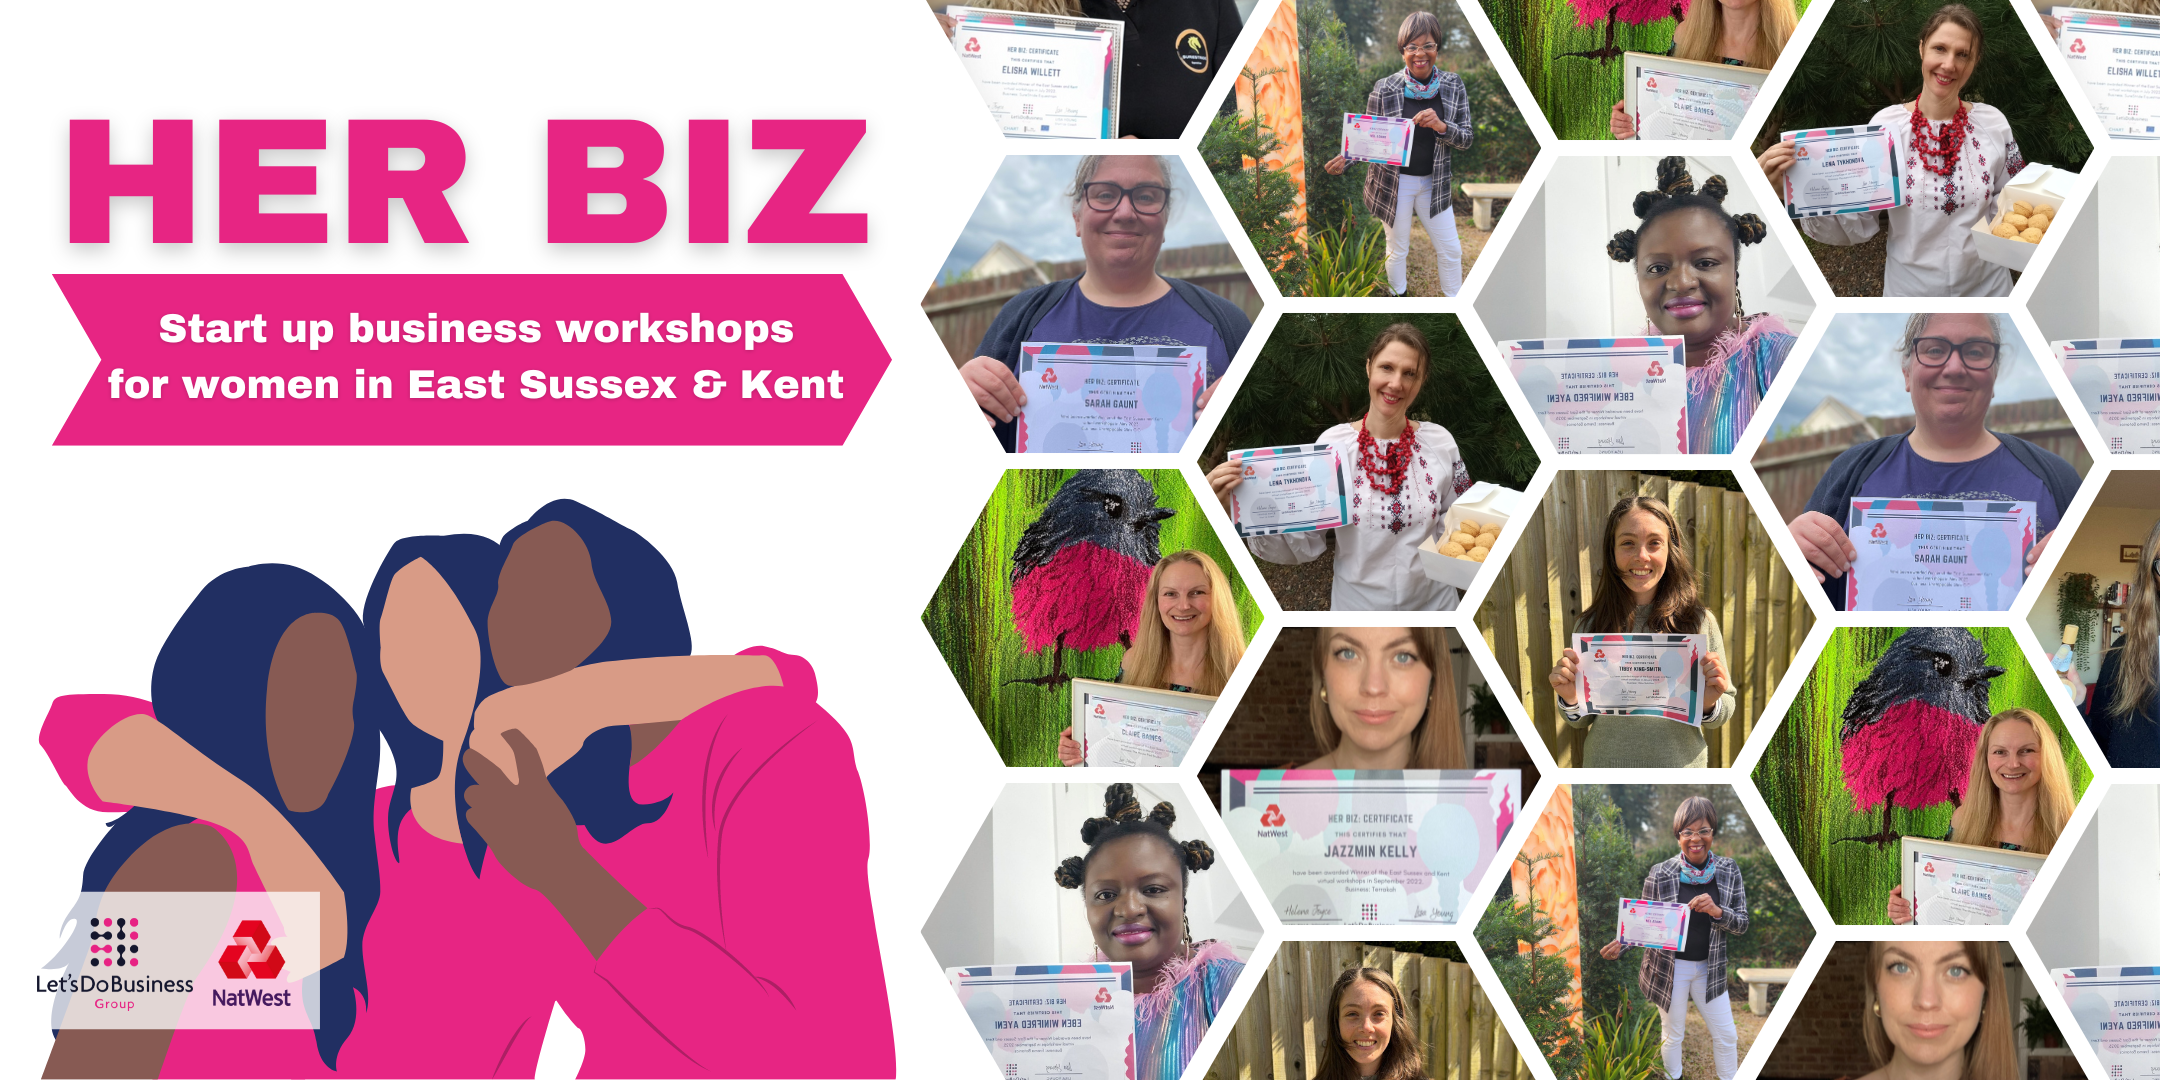  Her Biz: Free Women's Start-up Programme in Maidstone (Friday 14th & 21st June - 9:30am to 2:30pm)